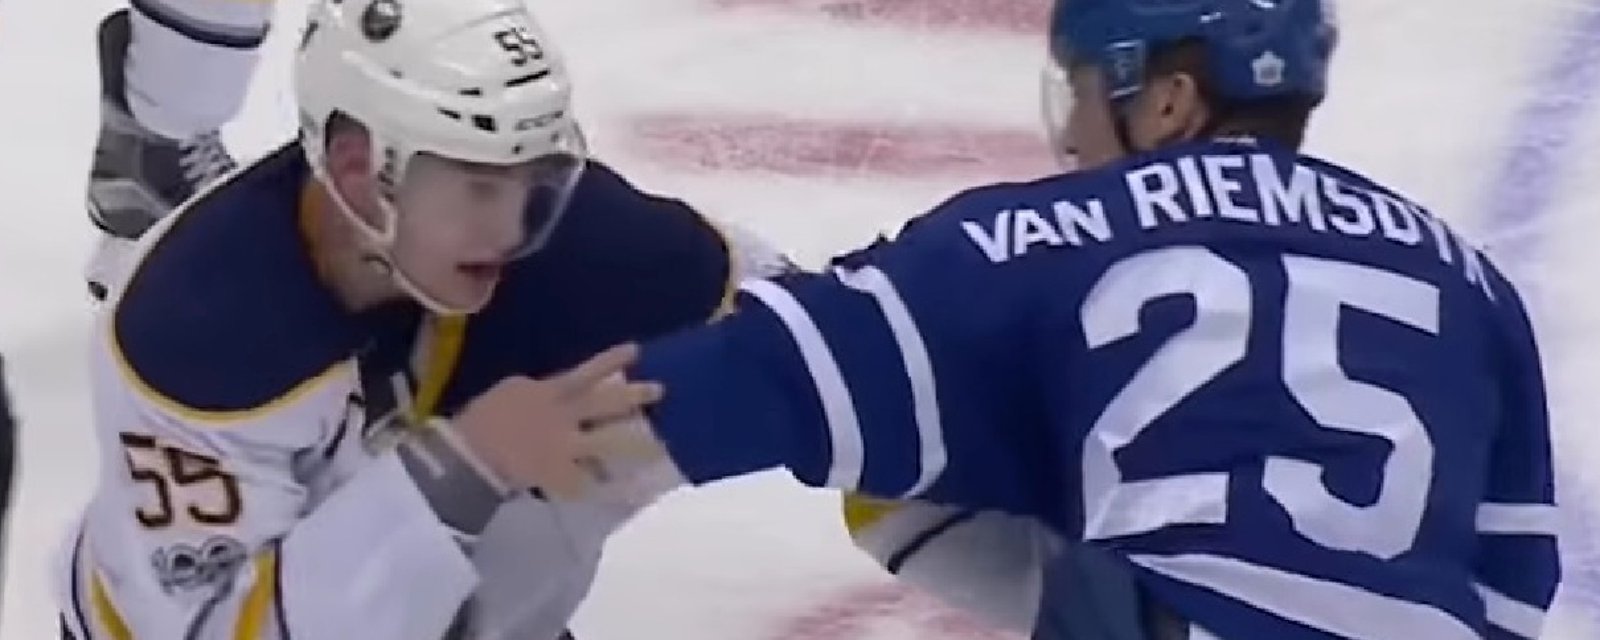 James Van Riemsdyk drops the gloves with towering opponent.